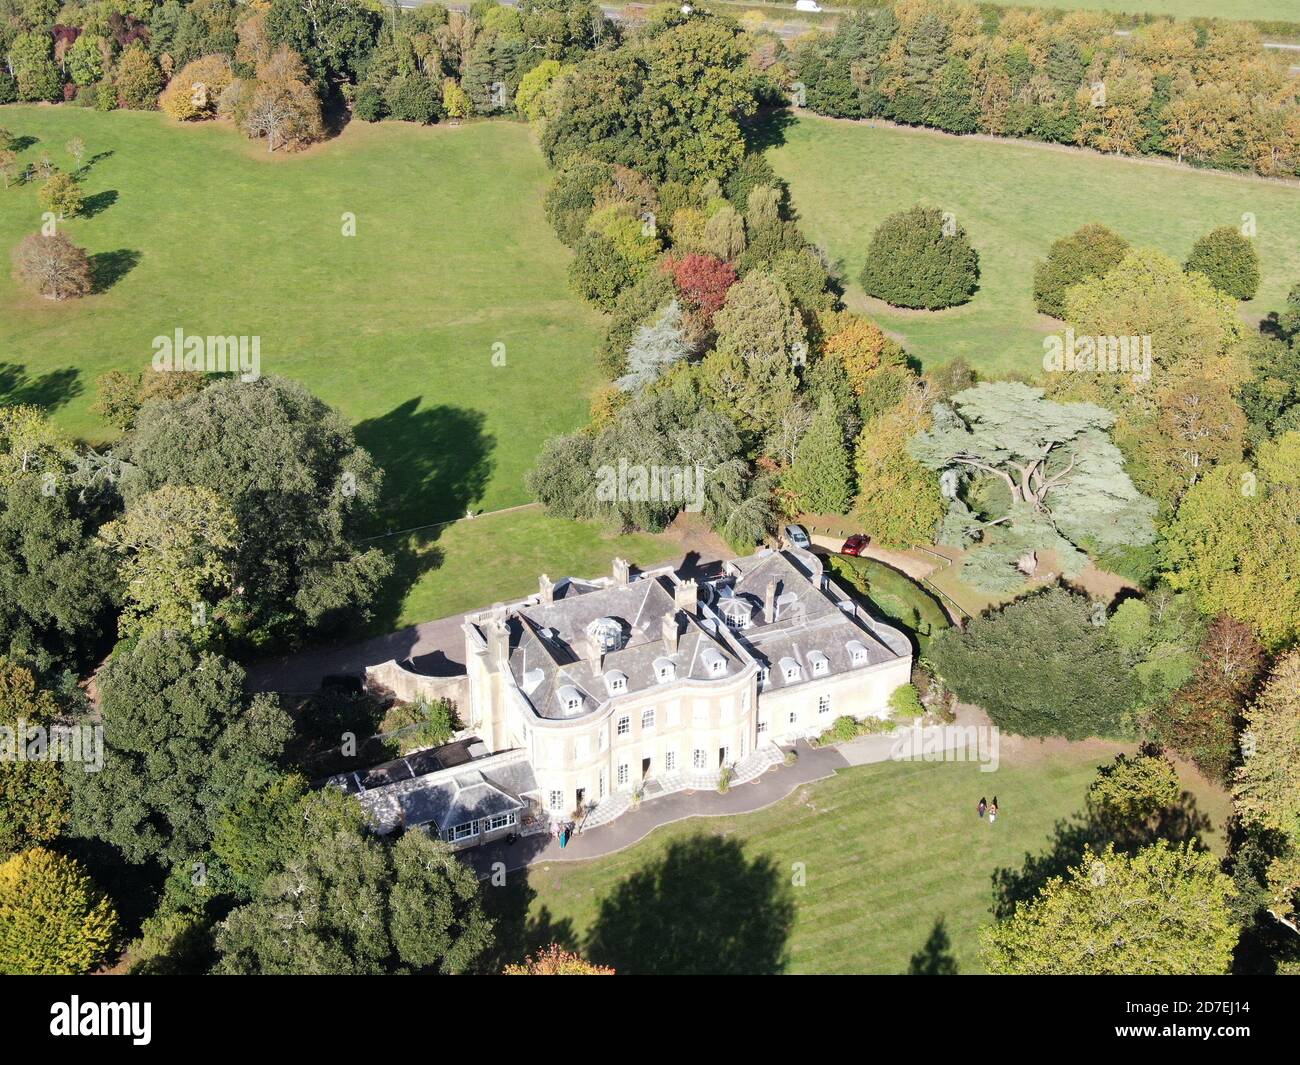 aerial view of Upton House in Upton Country park, a public recreation area in Poole , Dorset, England Stock Photo